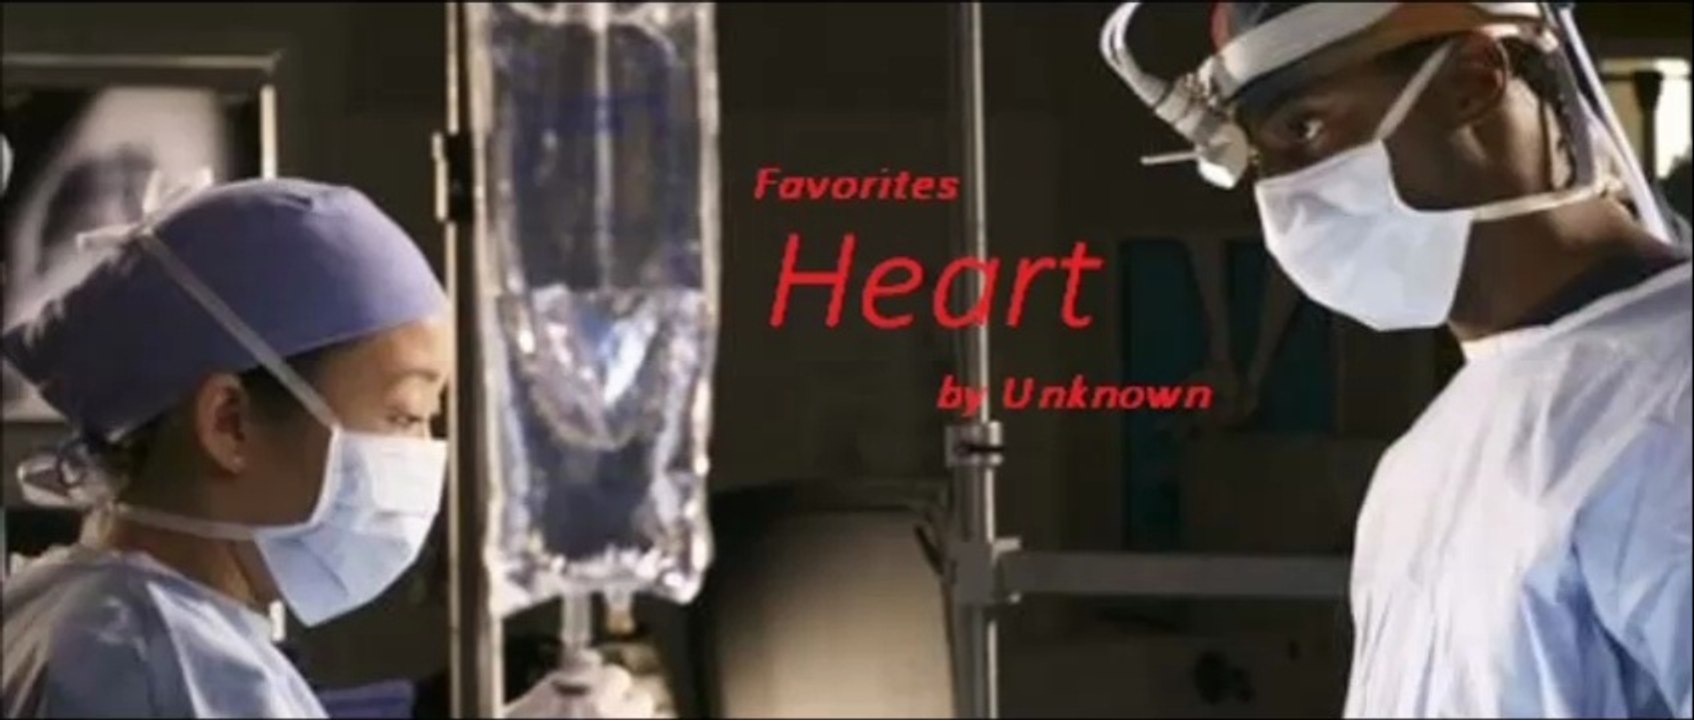 Heart by Unknown (R&B - Favorites)